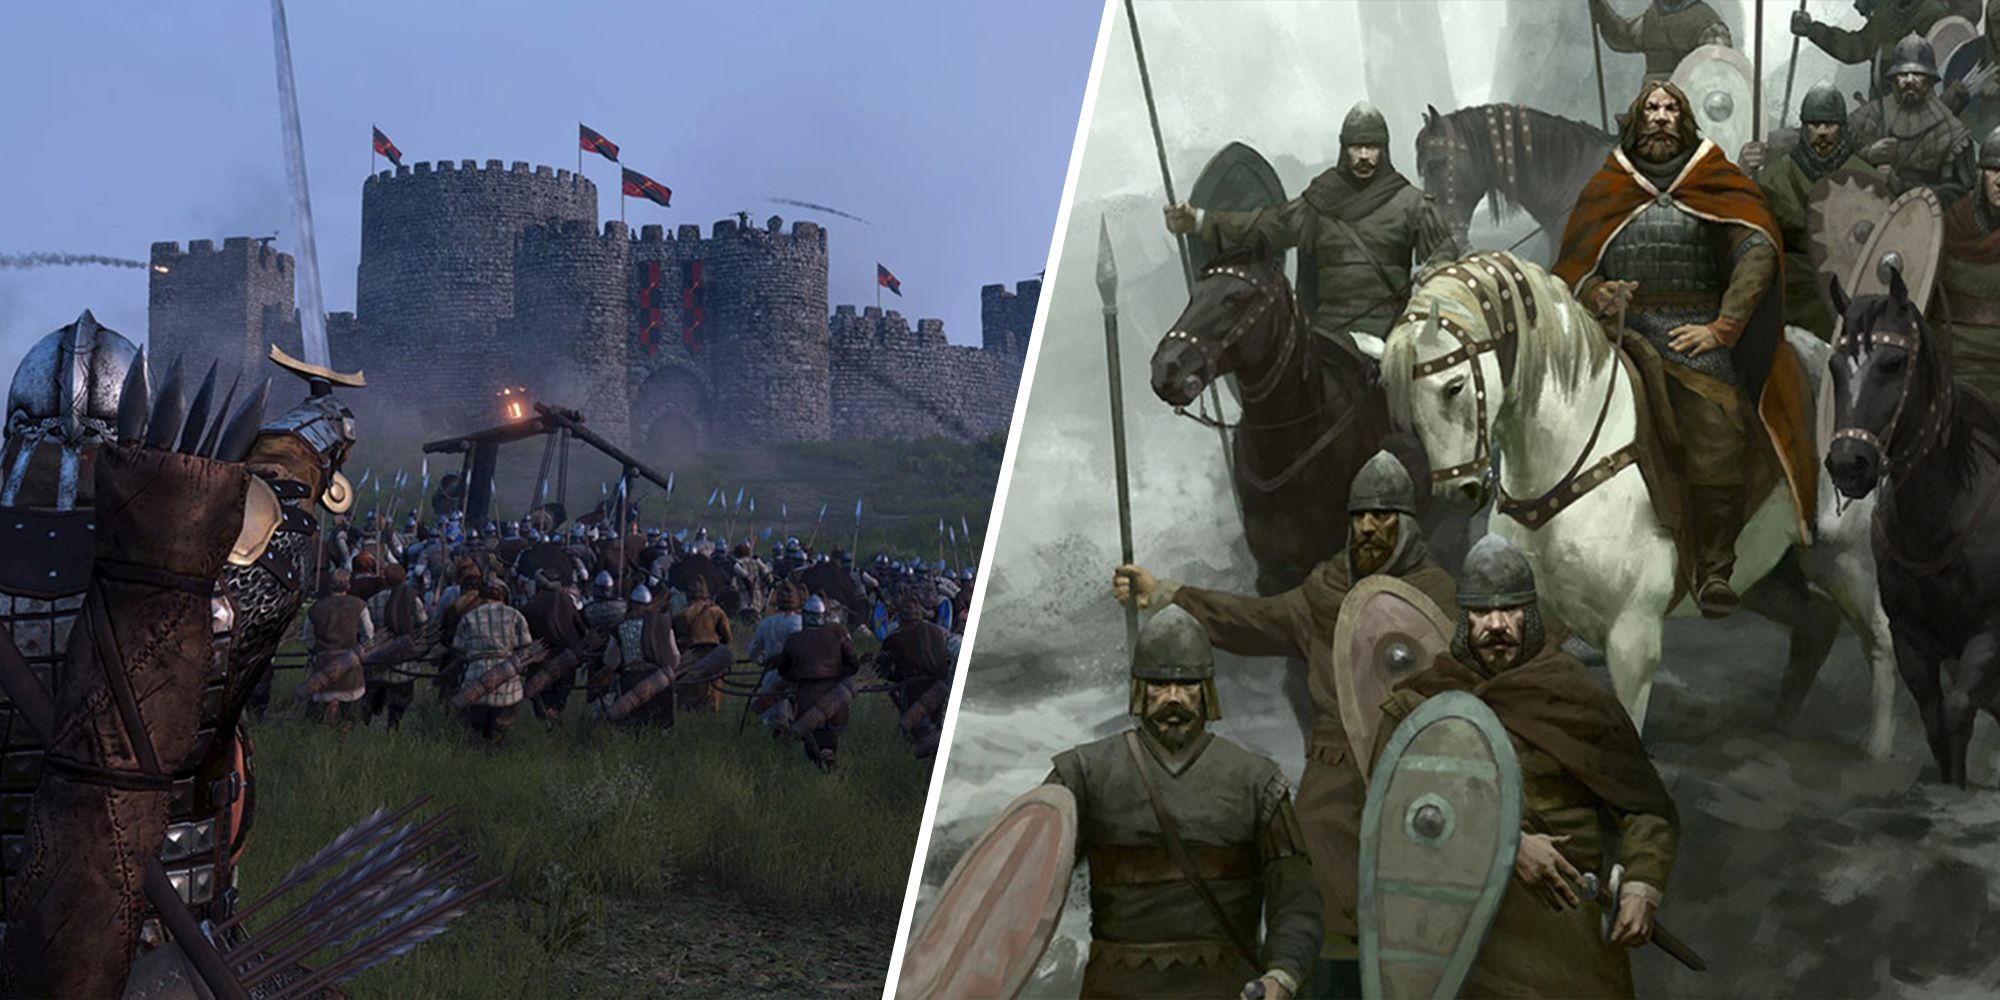 Split image of a castle under siege and a group of medieval soldiers.